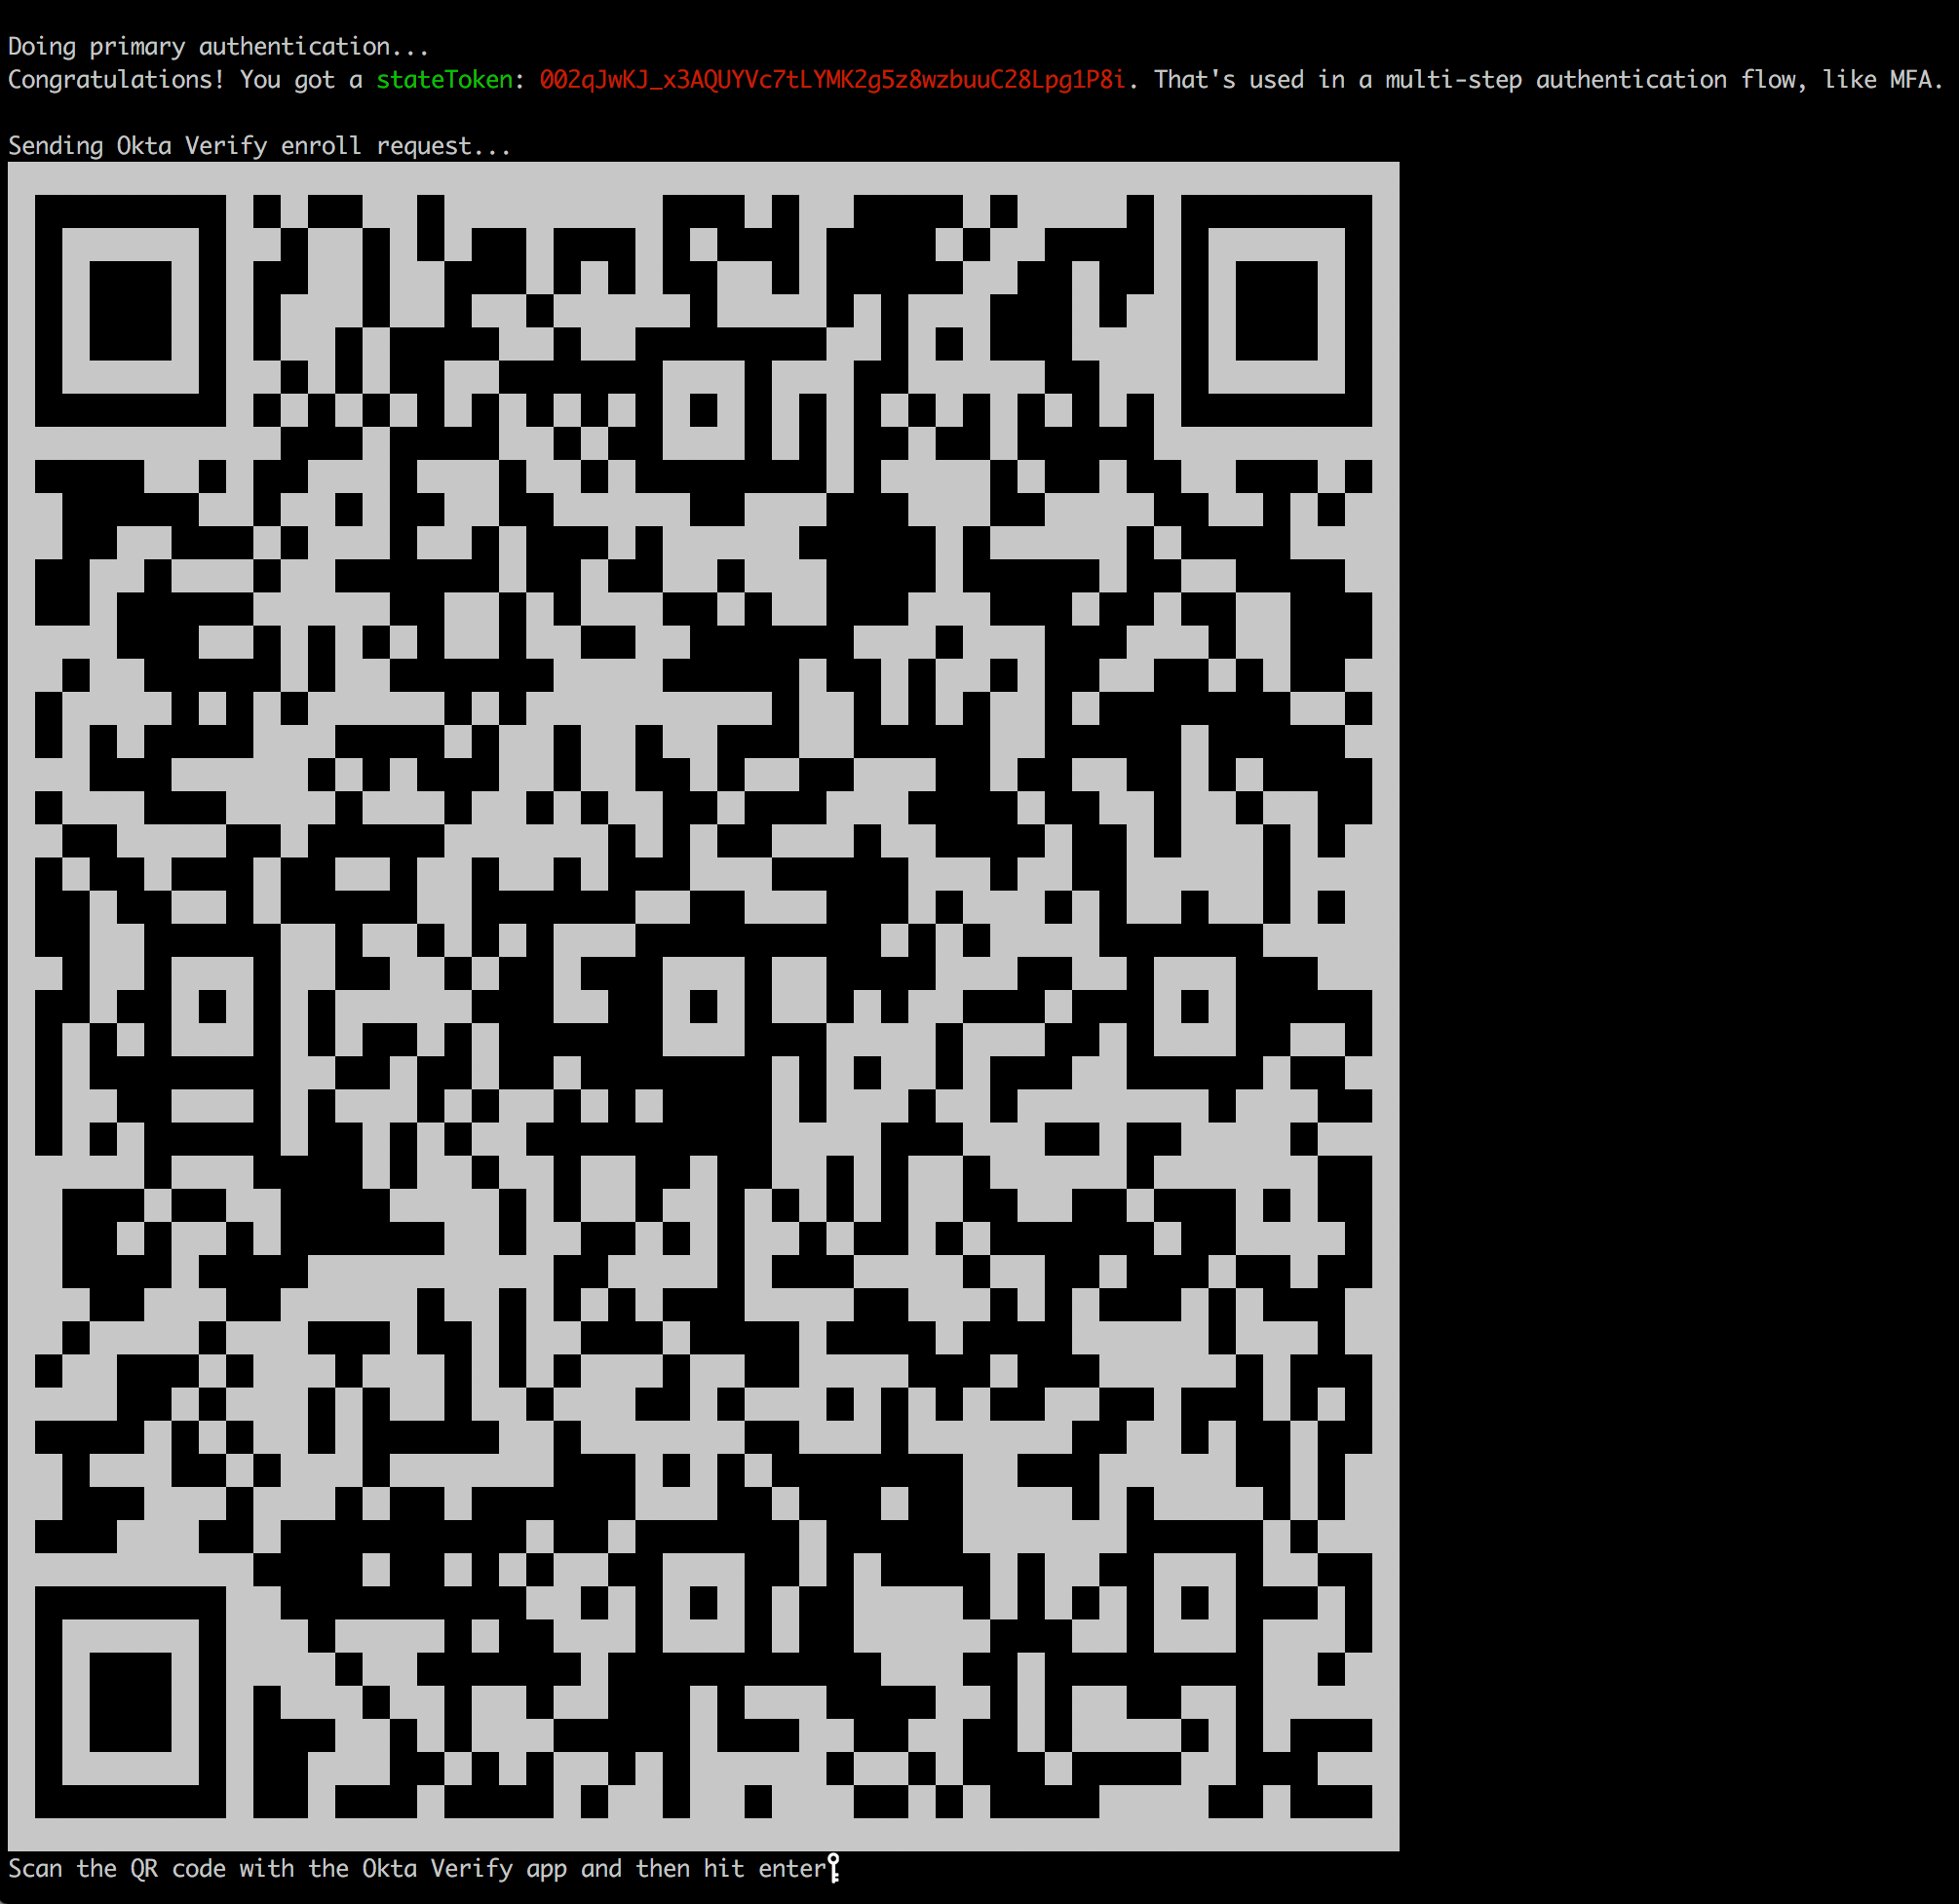 Sample QR code shown in the terminal window